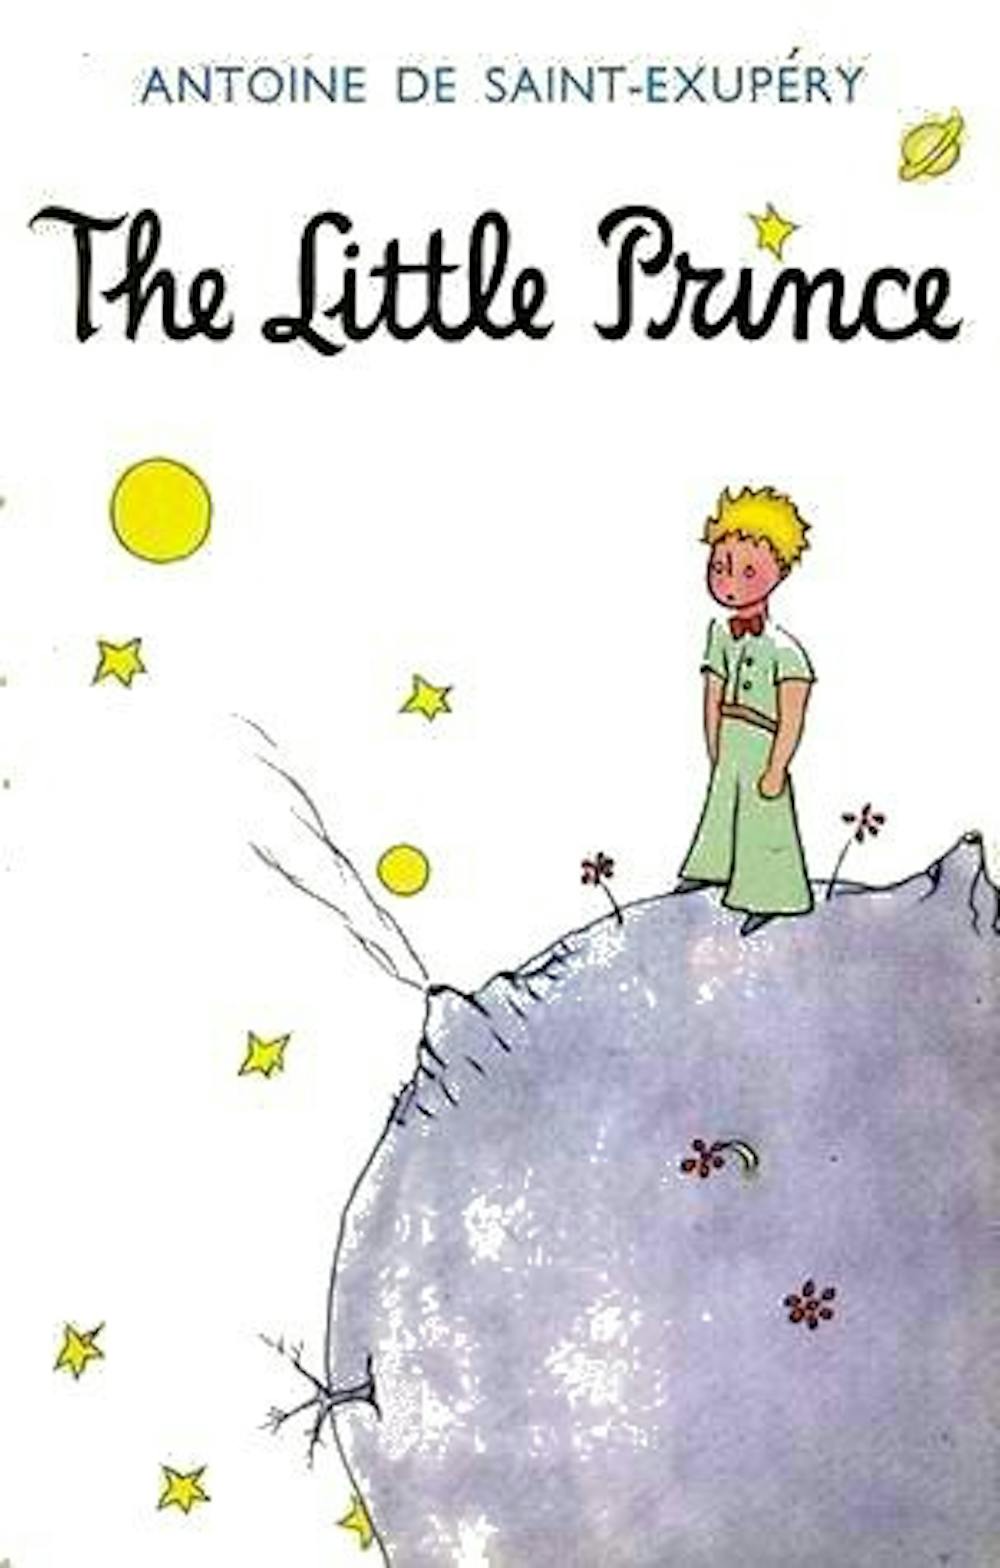 12 Charming Facts About The Little Prince